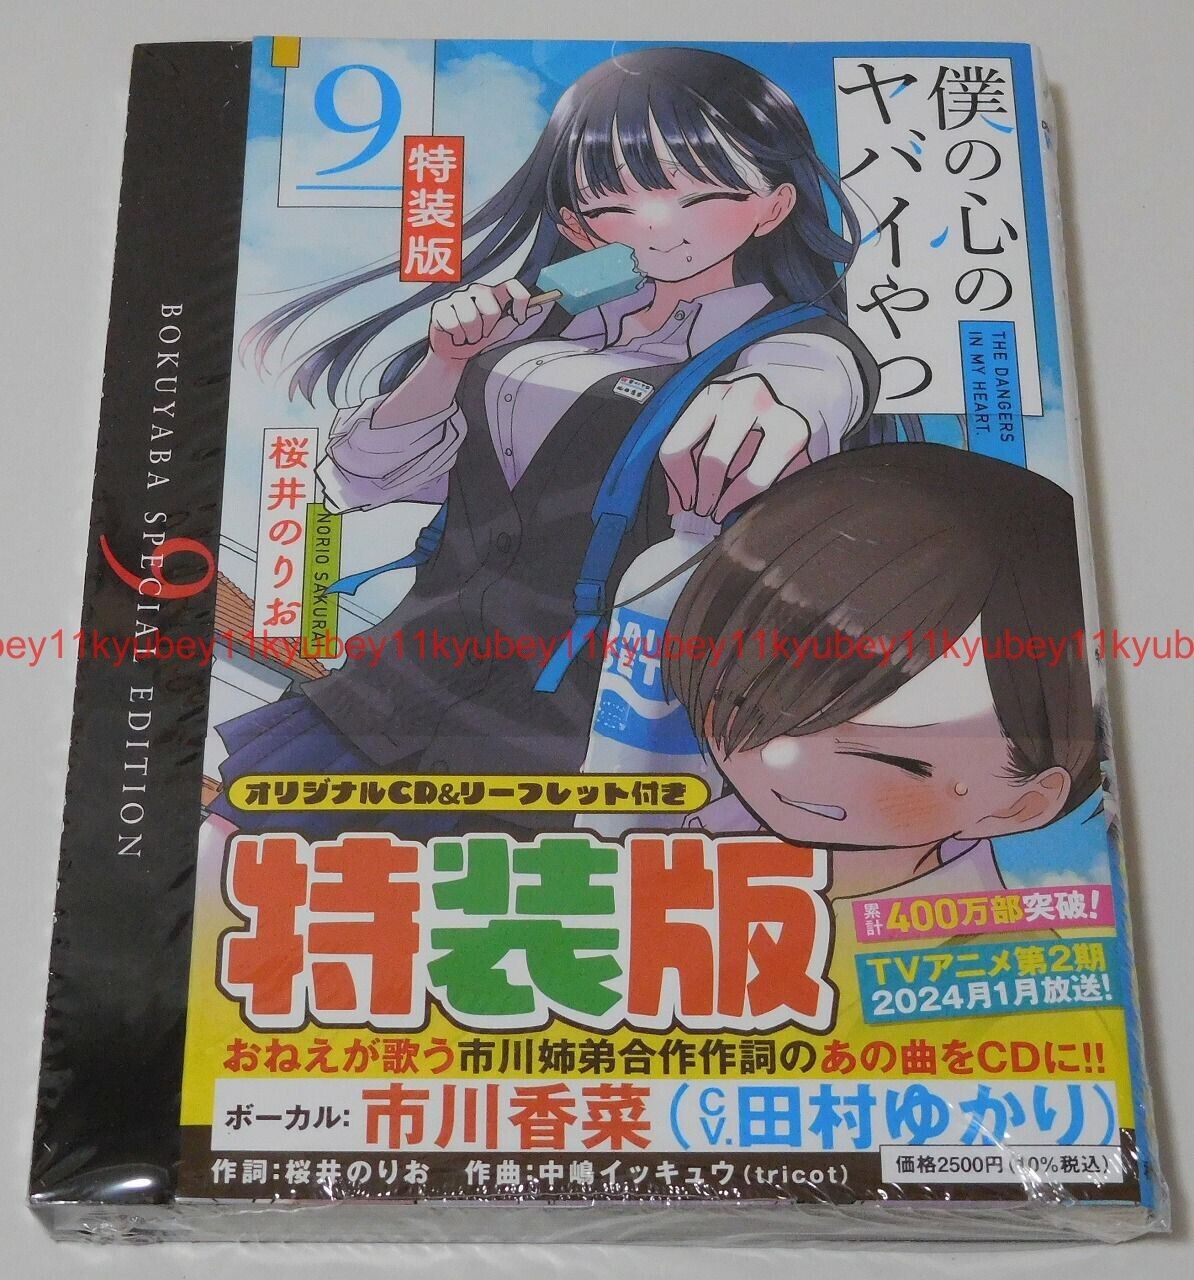 New The Dangers in My Heart Vol.9 Special Edition Manga+CD Japan 9784253229685